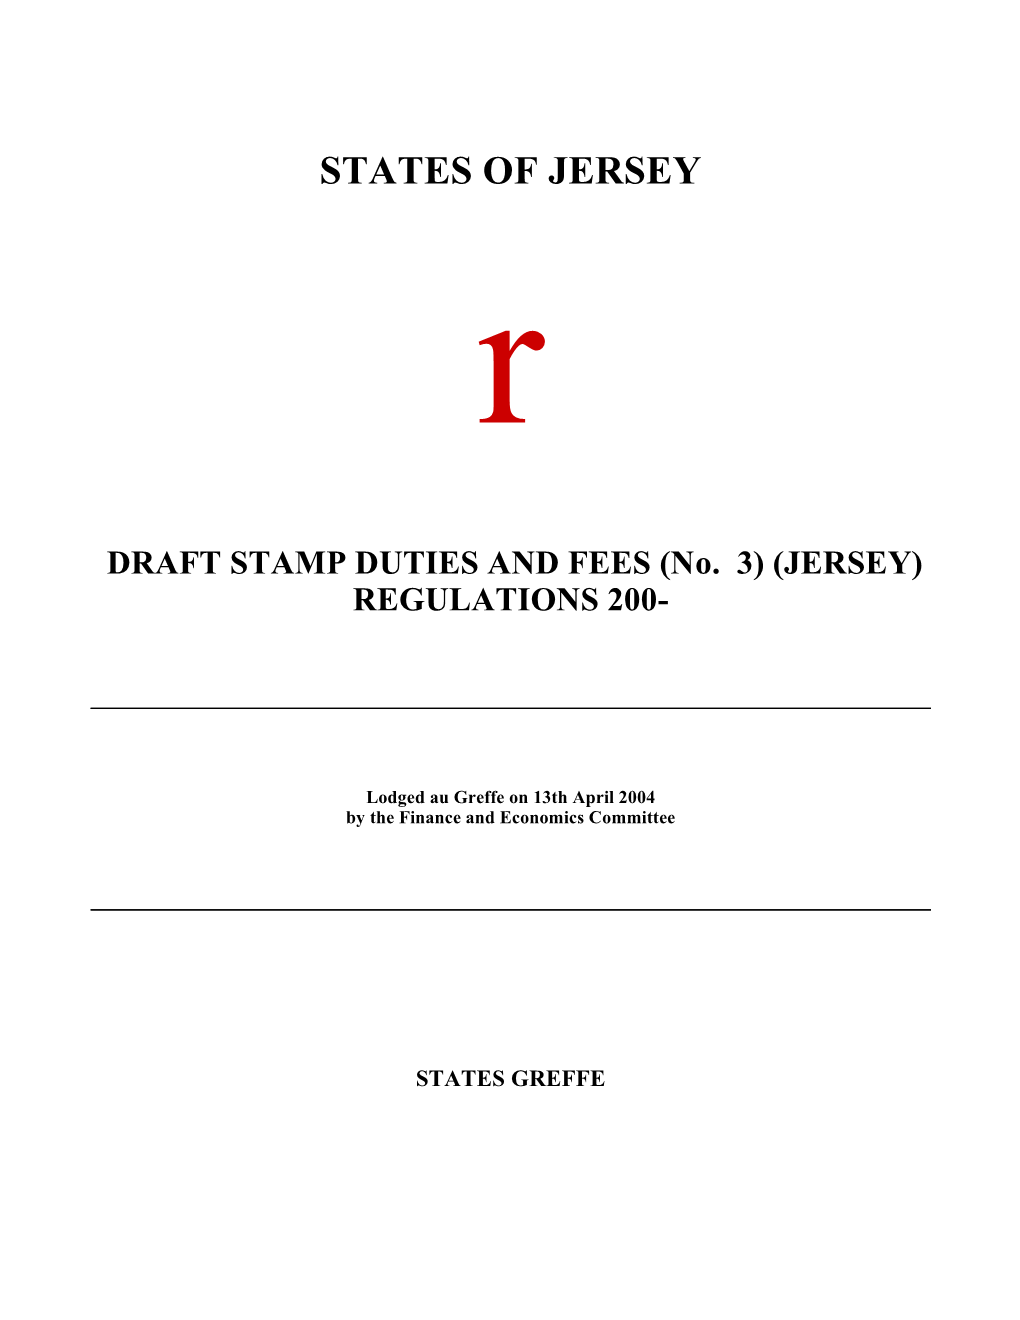 DRAFT STAMP DUTIES and FEES (No. 3) (JERSEY) REGULATIONS 200